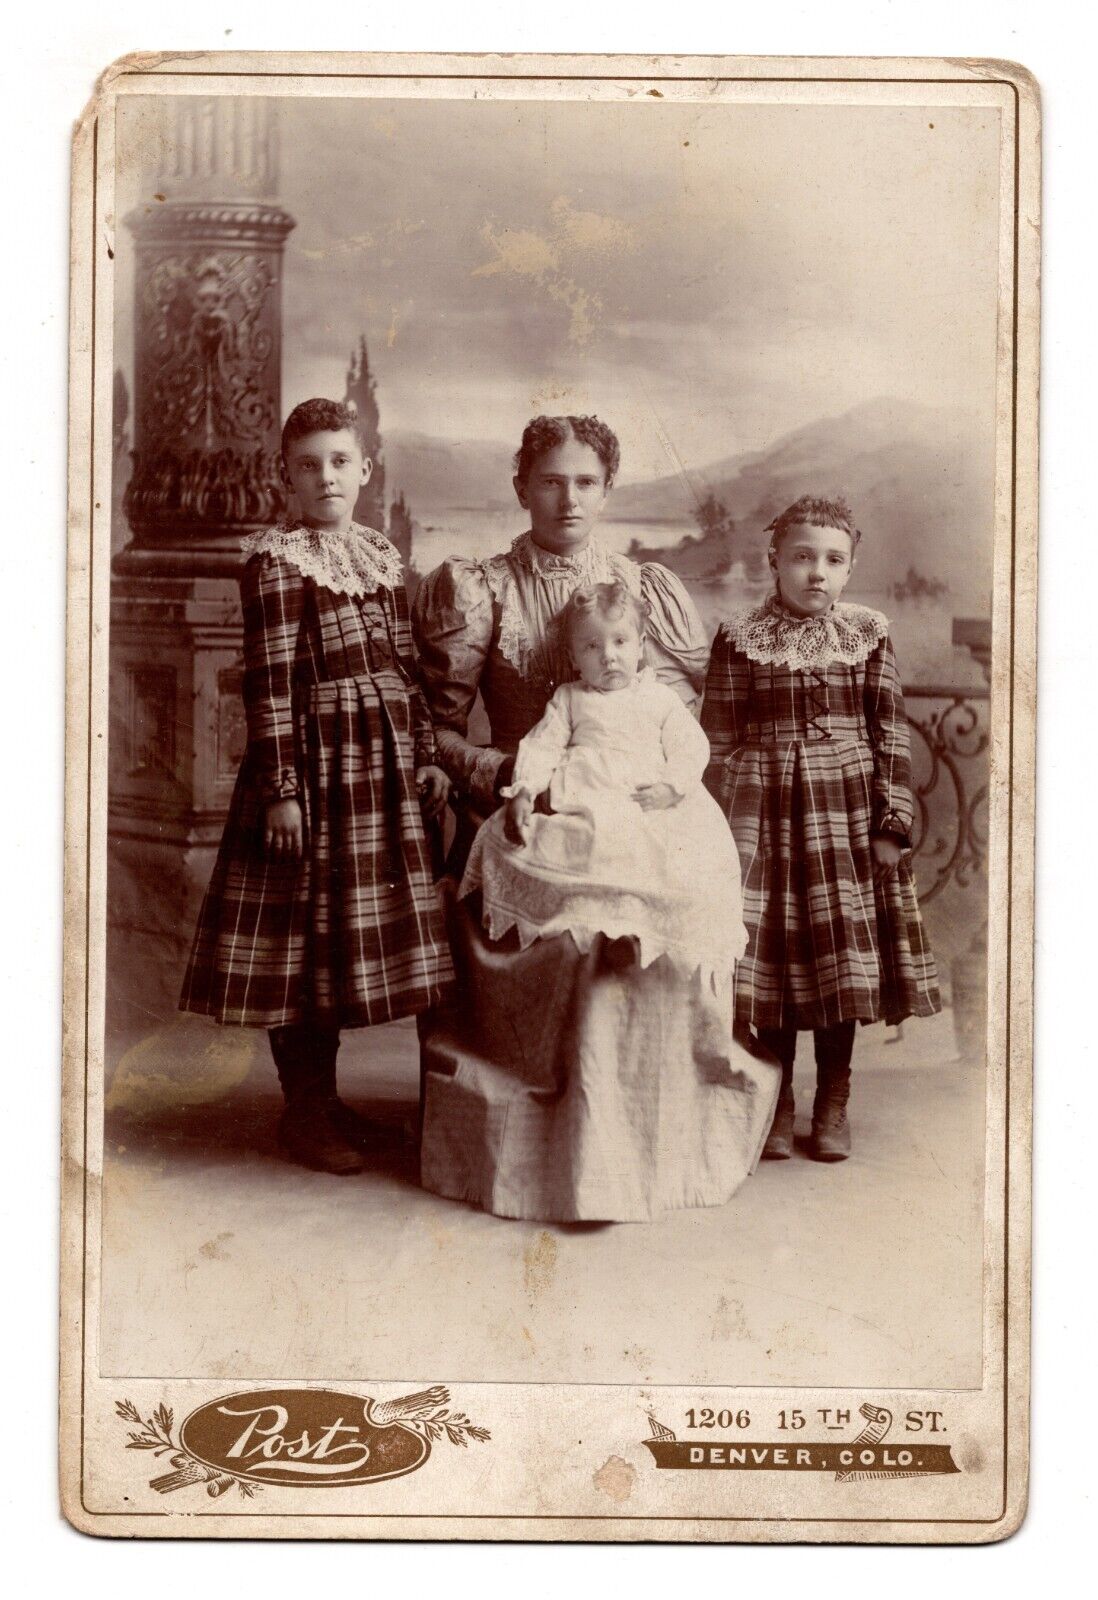 CIRCA 1890s CABINET CARD POST MOTHER WITH HER DAUGHTERS DENVER COLORADO